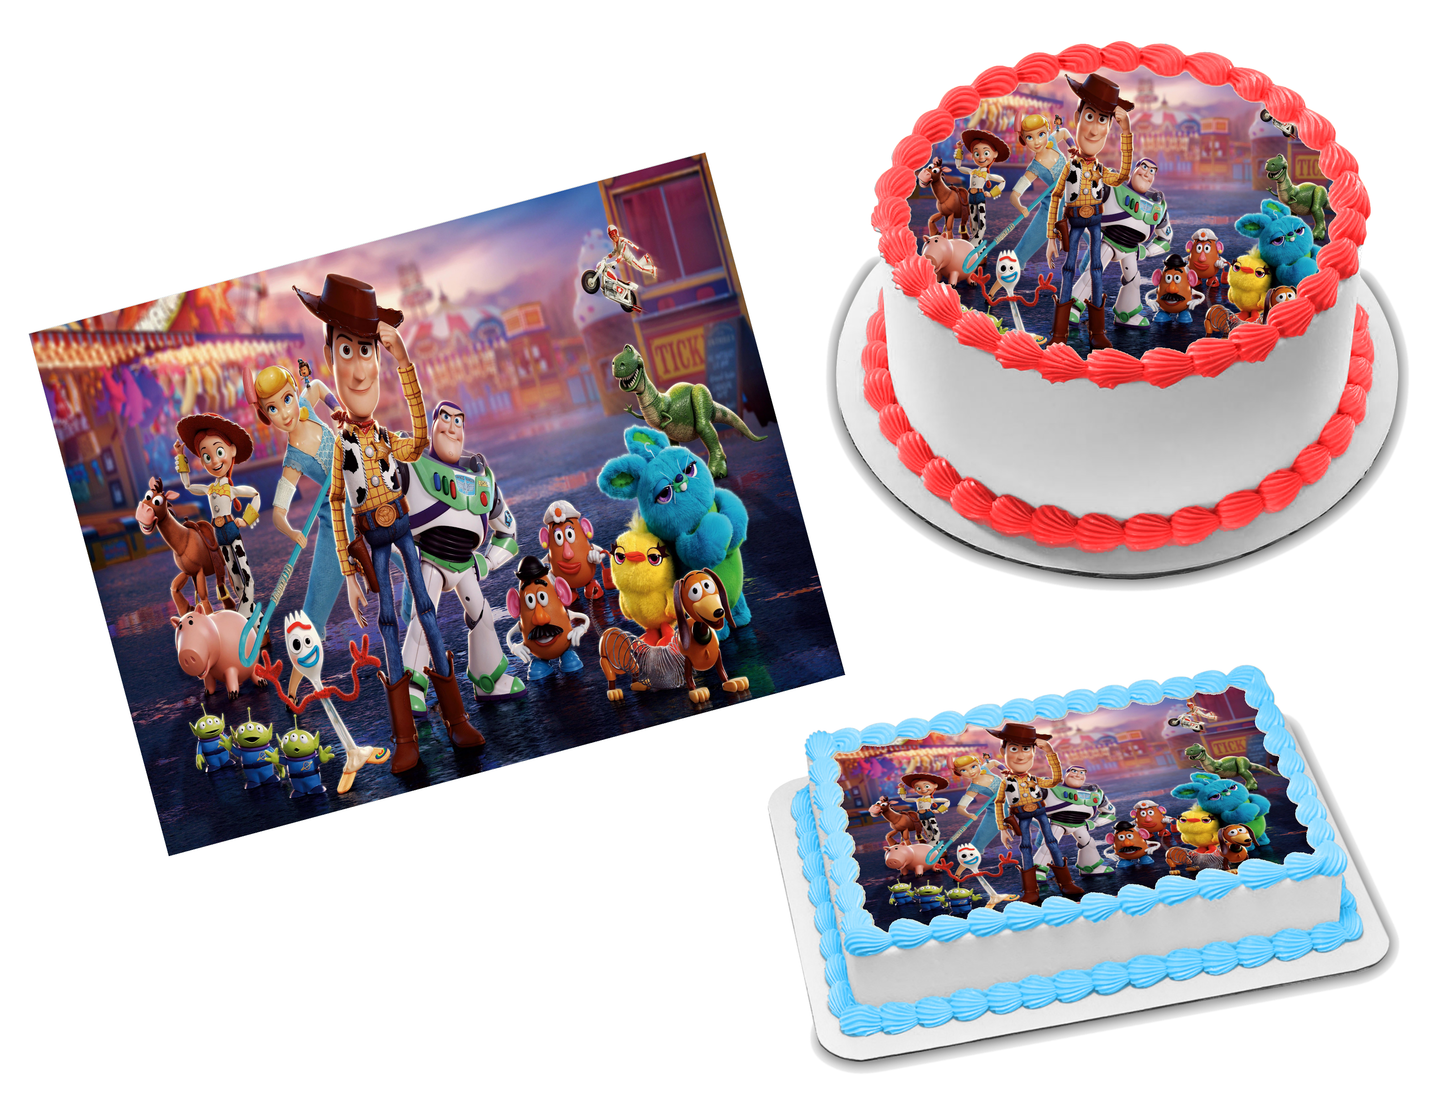 Toy Story 4 Edible Image Frosting Sheet #1 (70+ sizes)